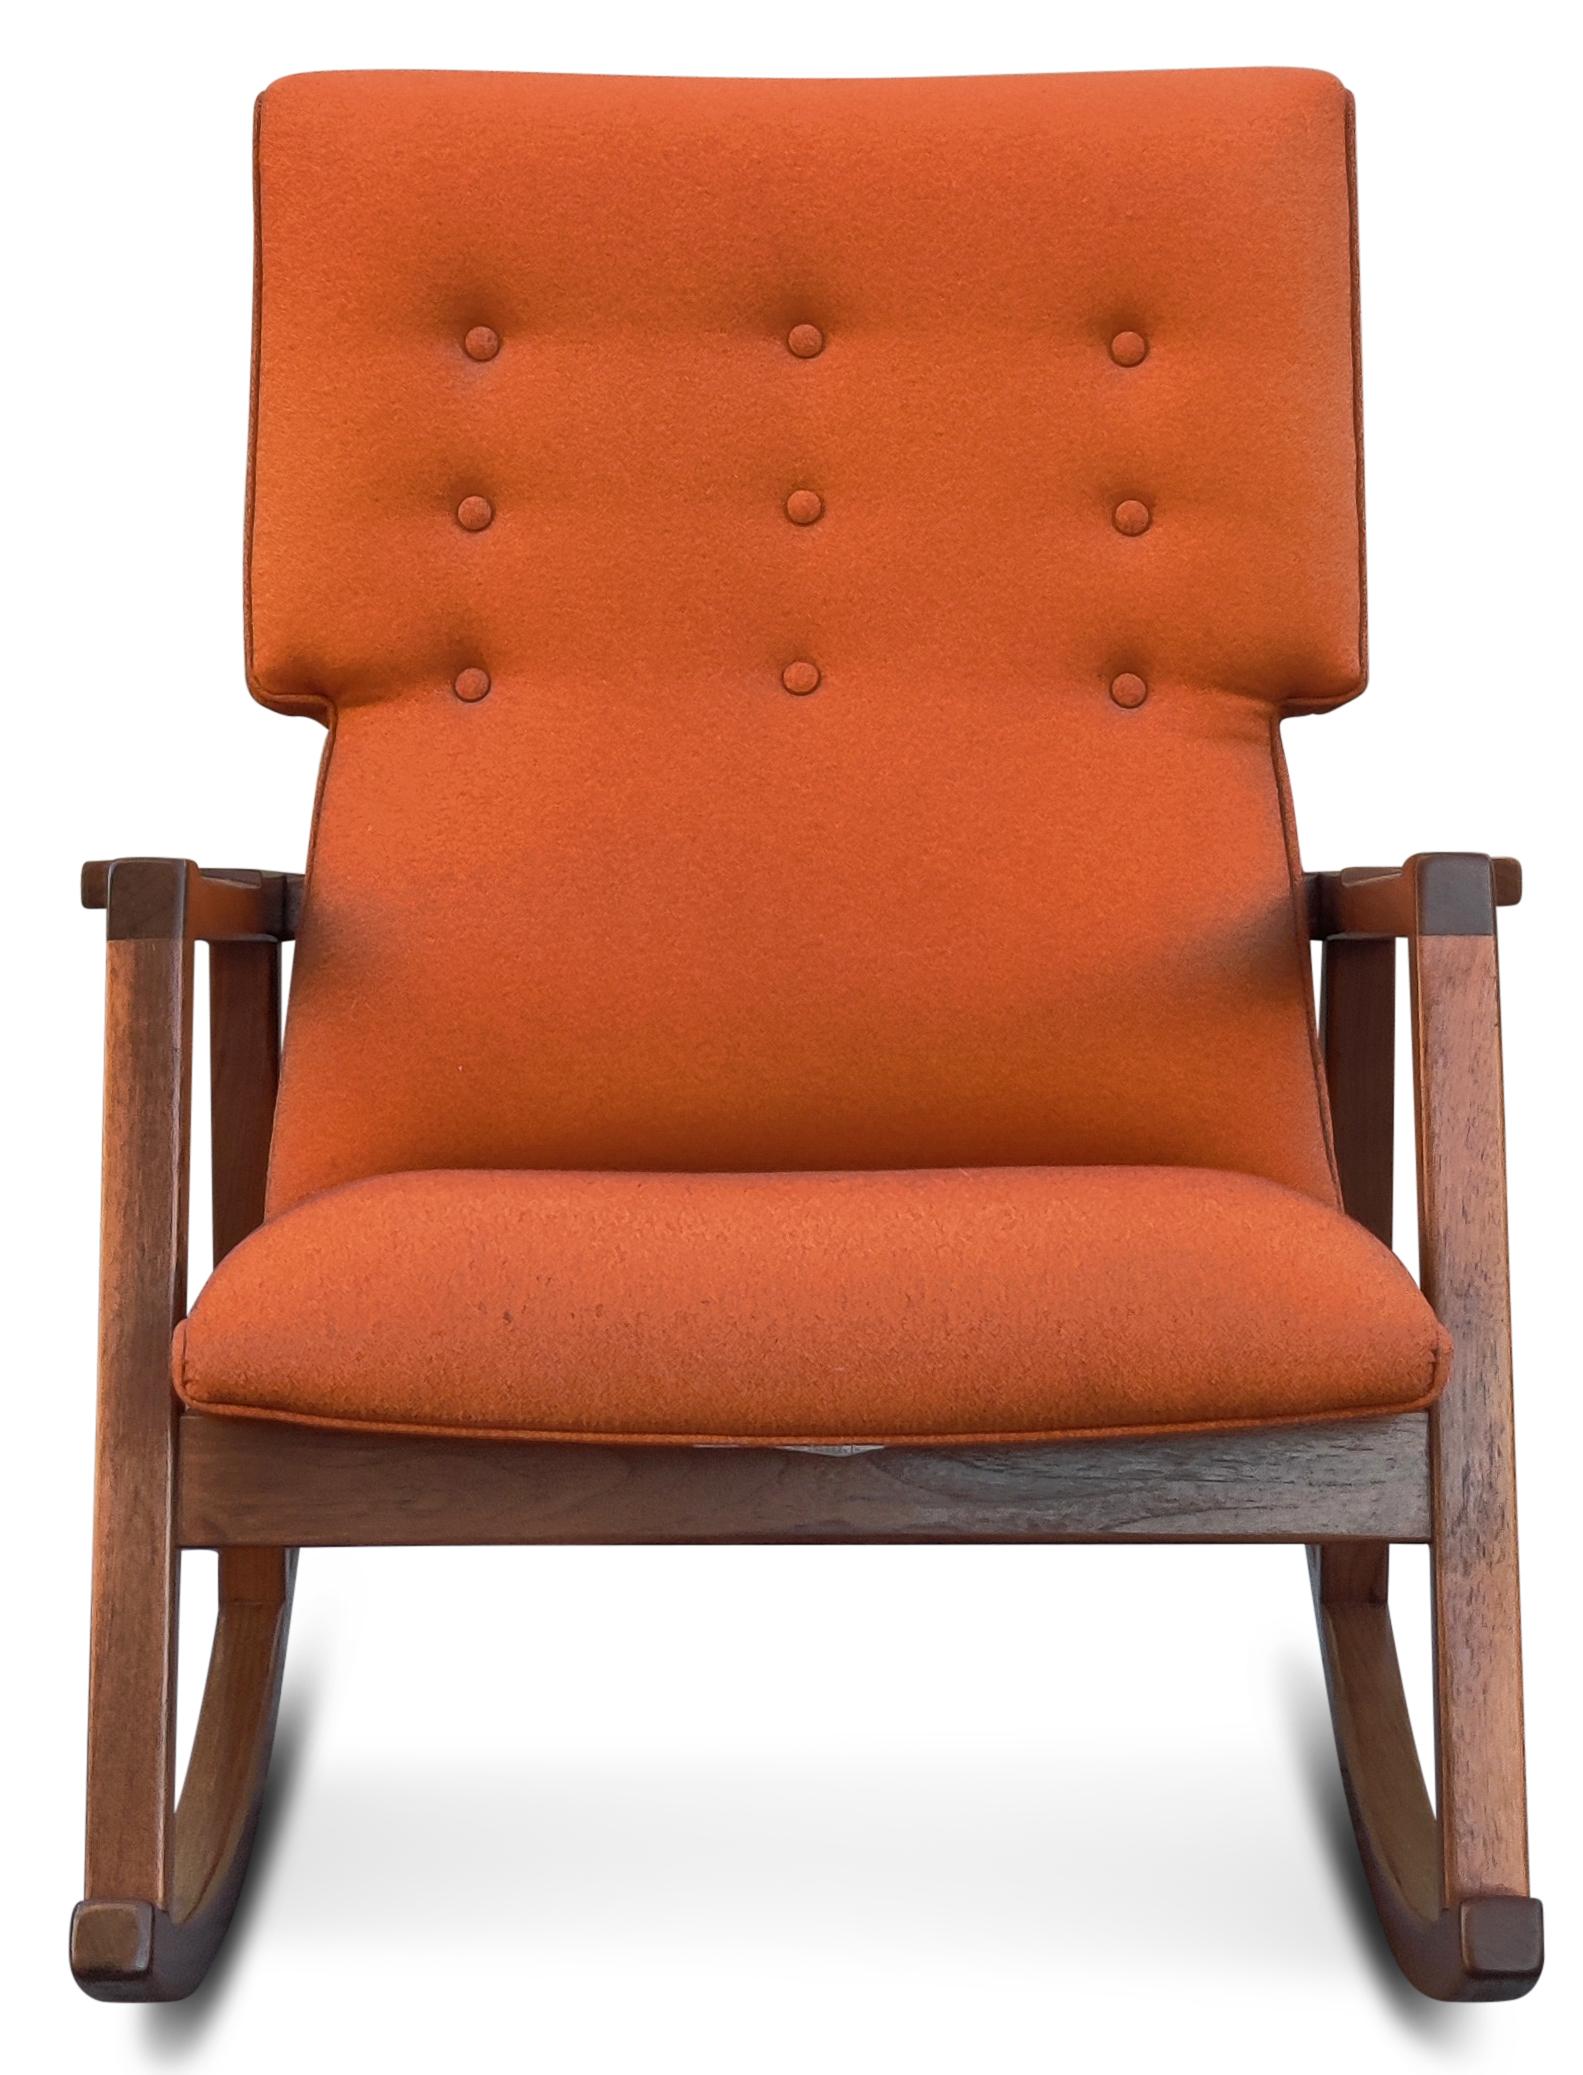 Coming from prestigious manufacturer Design within reach, based in Connecticut, this Jens Risom designed walnut and orange wool rocking chair makes a statement. The vibrant orange contrasts very well with the deep and rich brown of the walnut frame,